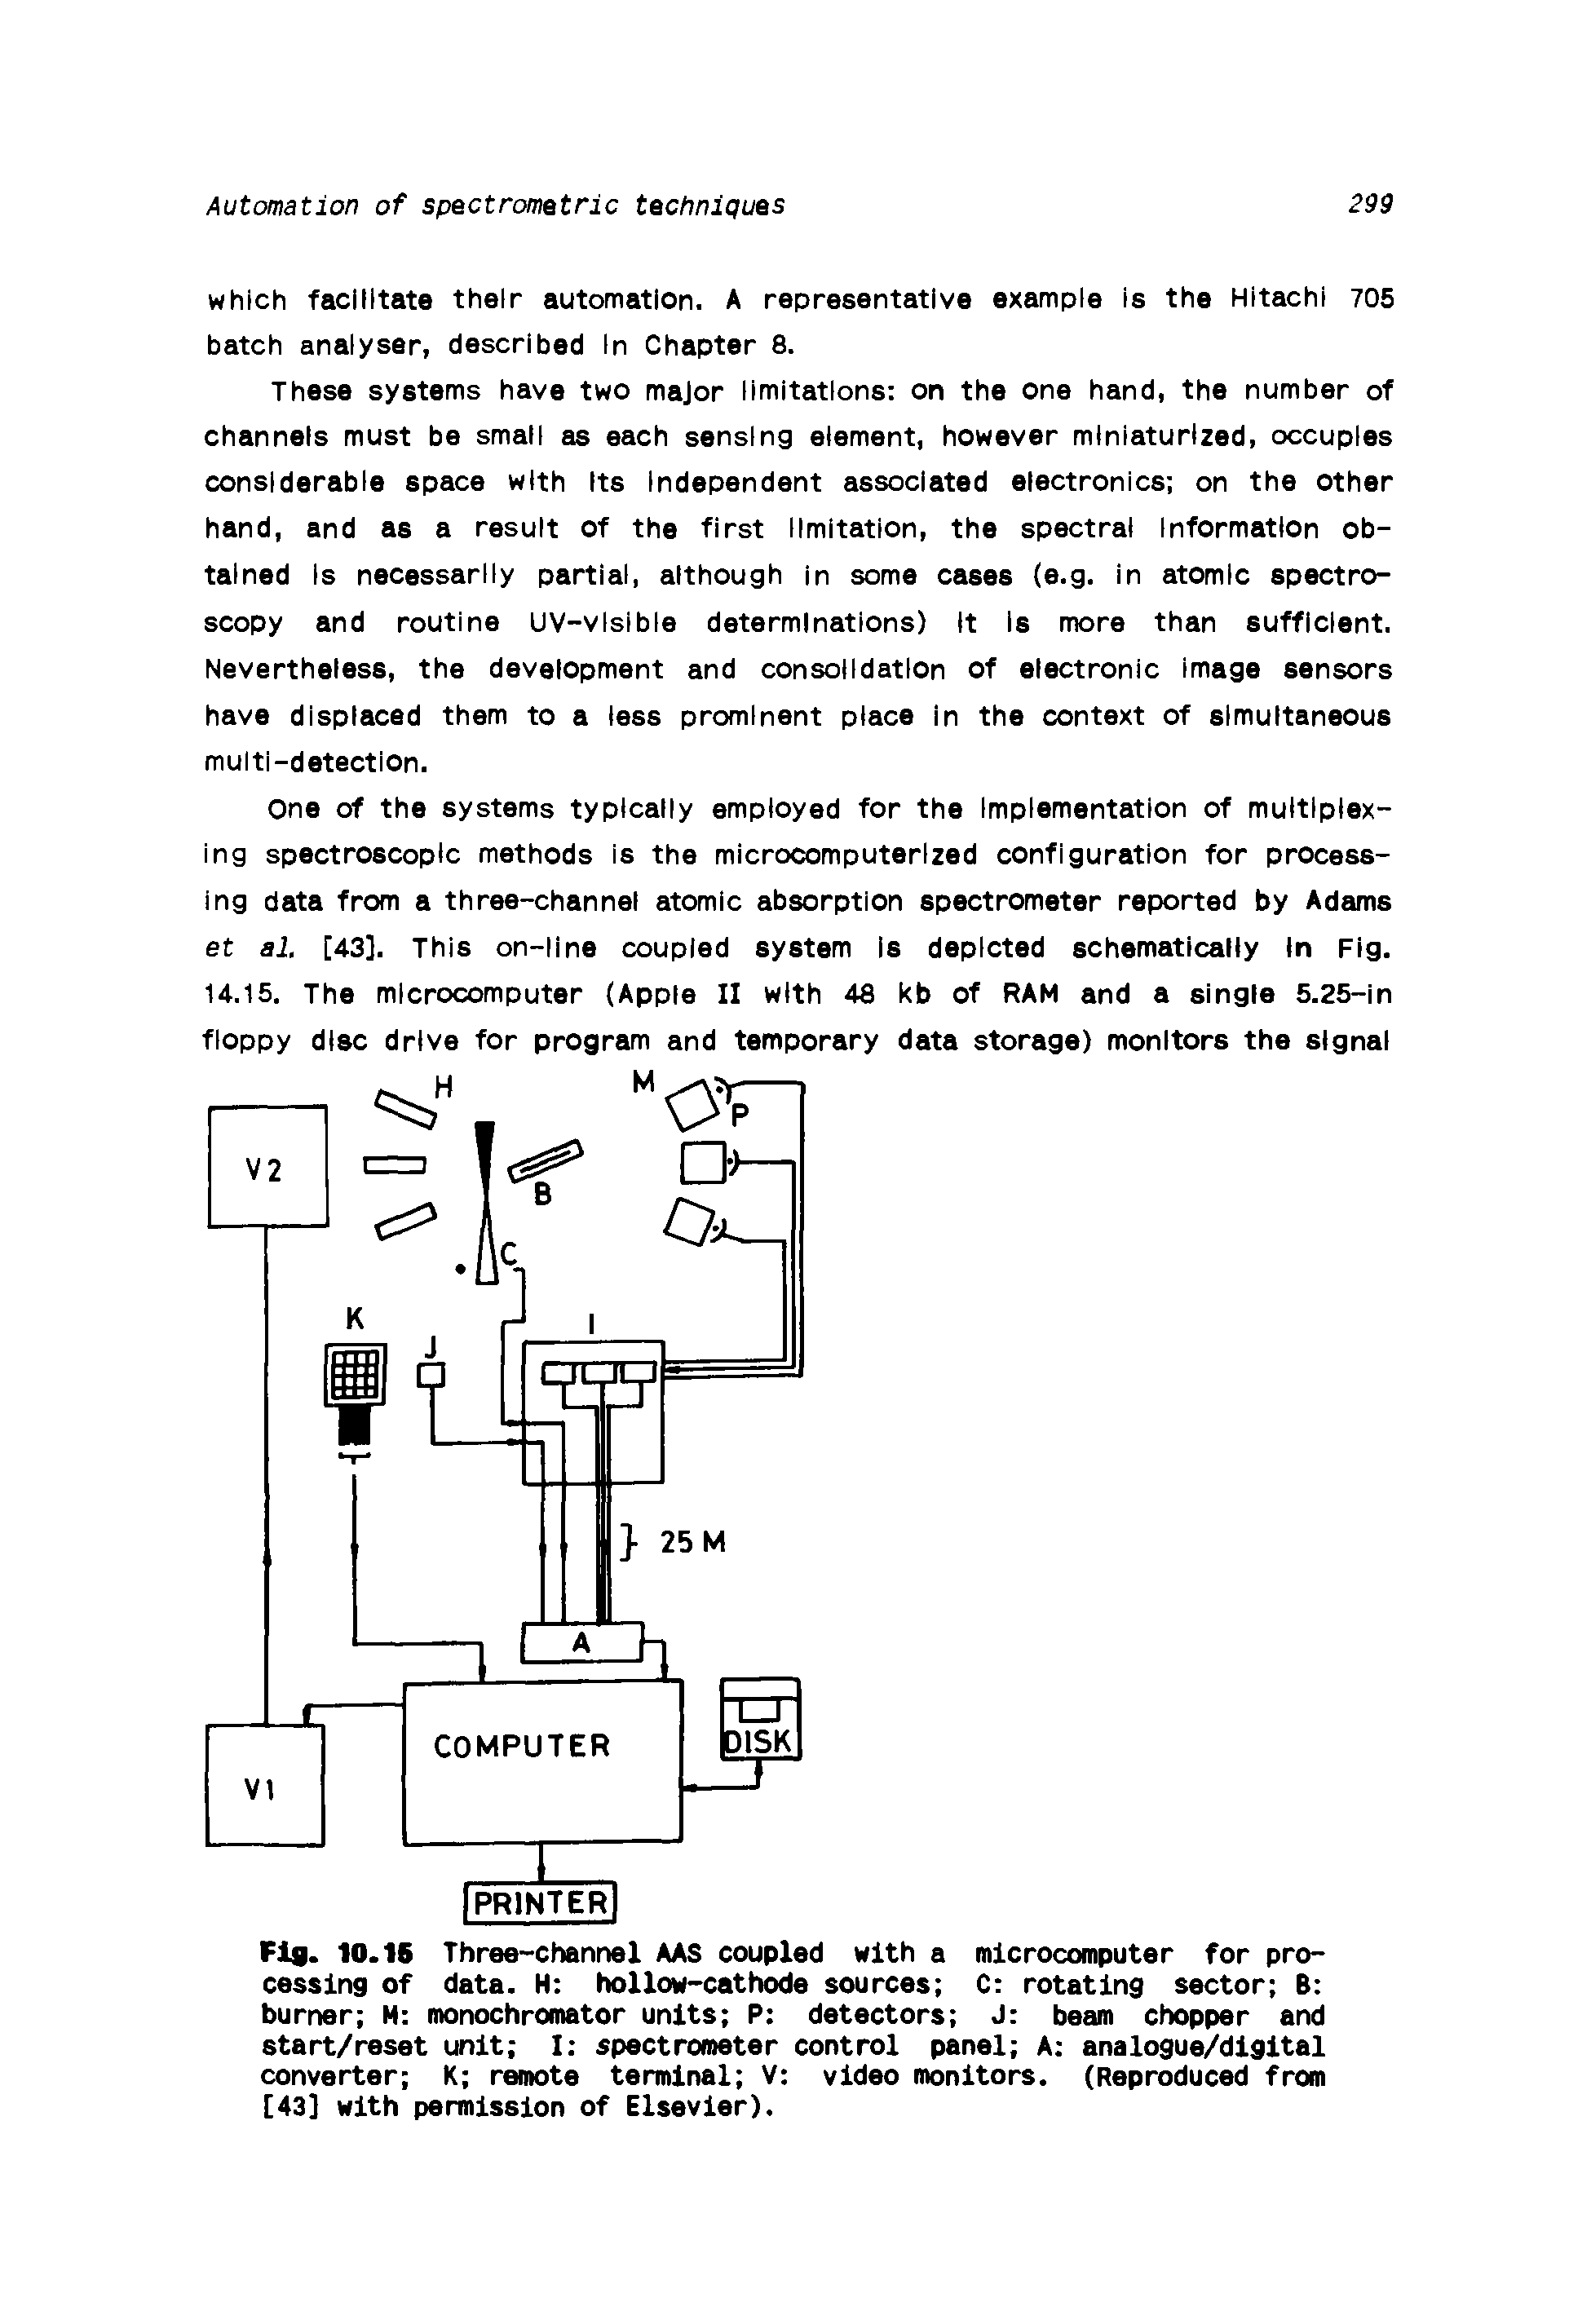 Fig. 10.15 Three-channel AAS coupled with a microcomputer for processing of data. H hollow-cathode sources C rotating sector B burner M monochromator units P detectors J beam chopper and start/reset unit I spectrometer control panel A analogue/digital converter K remote terminal V video monitors. (Reproduced from [43] with permission of Elsevier).